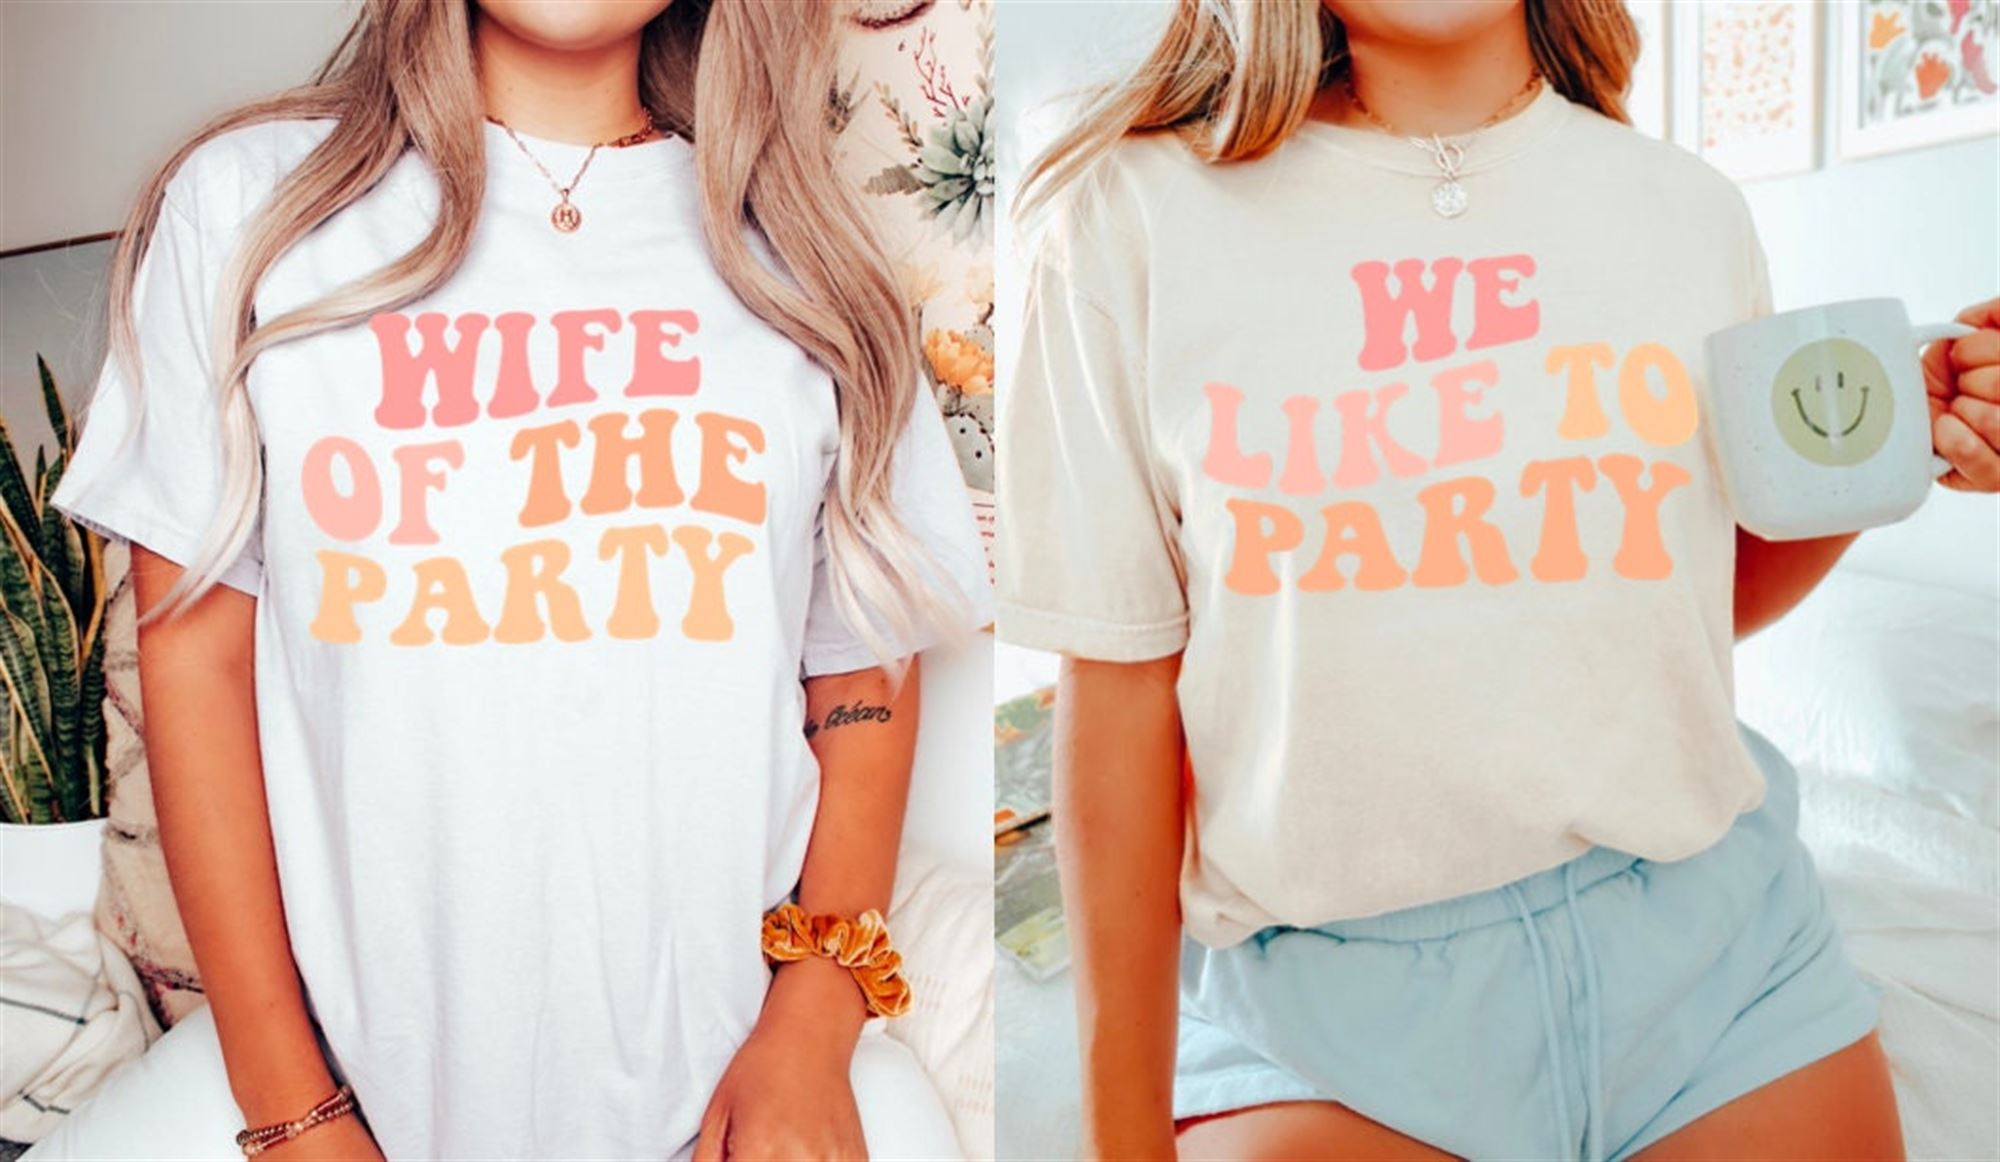 Awesome Bachelorette Wife Of The Party Shirt We Like To Party T-shirt Retro Graphic Bridal Party Tee Girls Group Weekend Trip Favors Bach Gift 